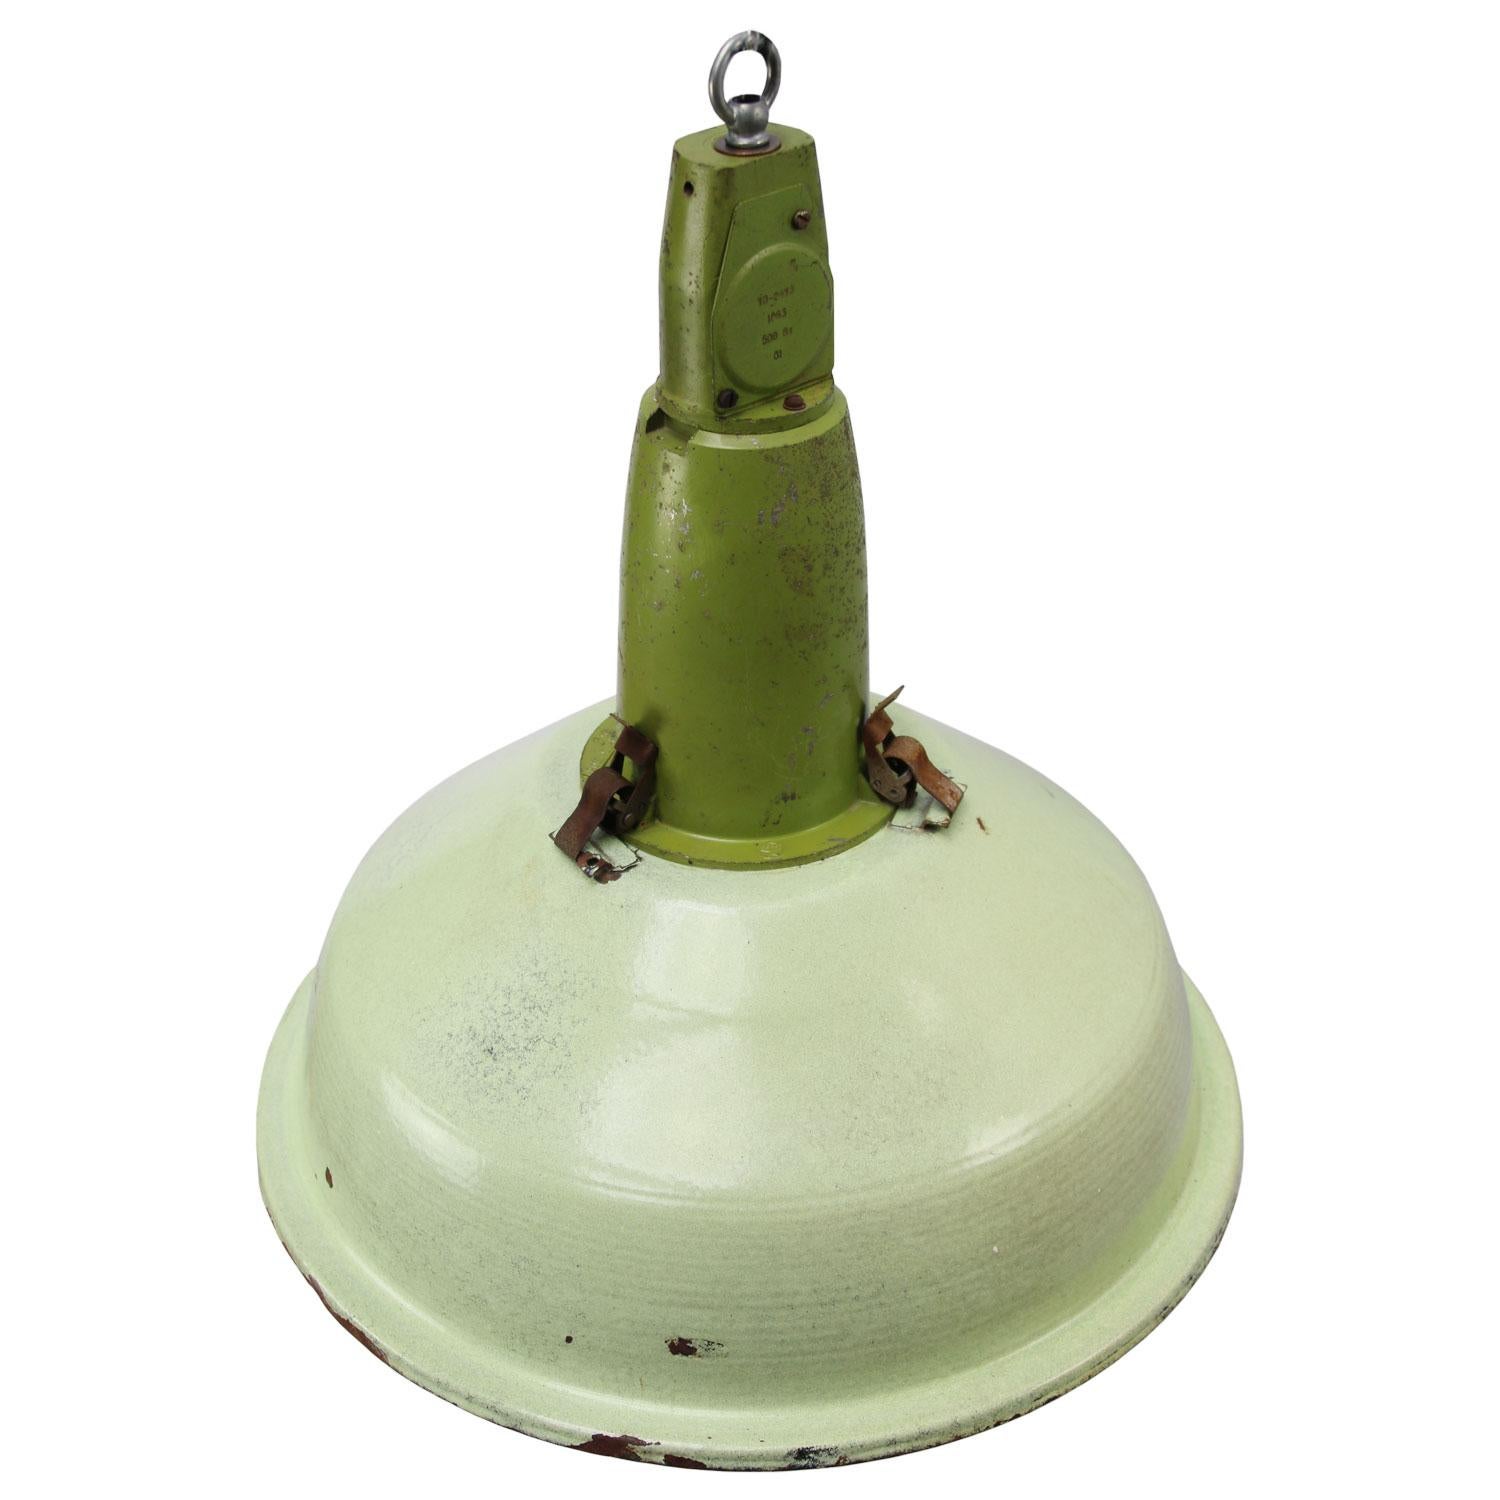 Enamel industrial pendant
light green enamel shade, white inside.
green cast aluminium top.

Weight: 2.70 kg / 6 lb

Priced per individual item. All lamps have been made suitable by international standards for incandescent light bulbs,